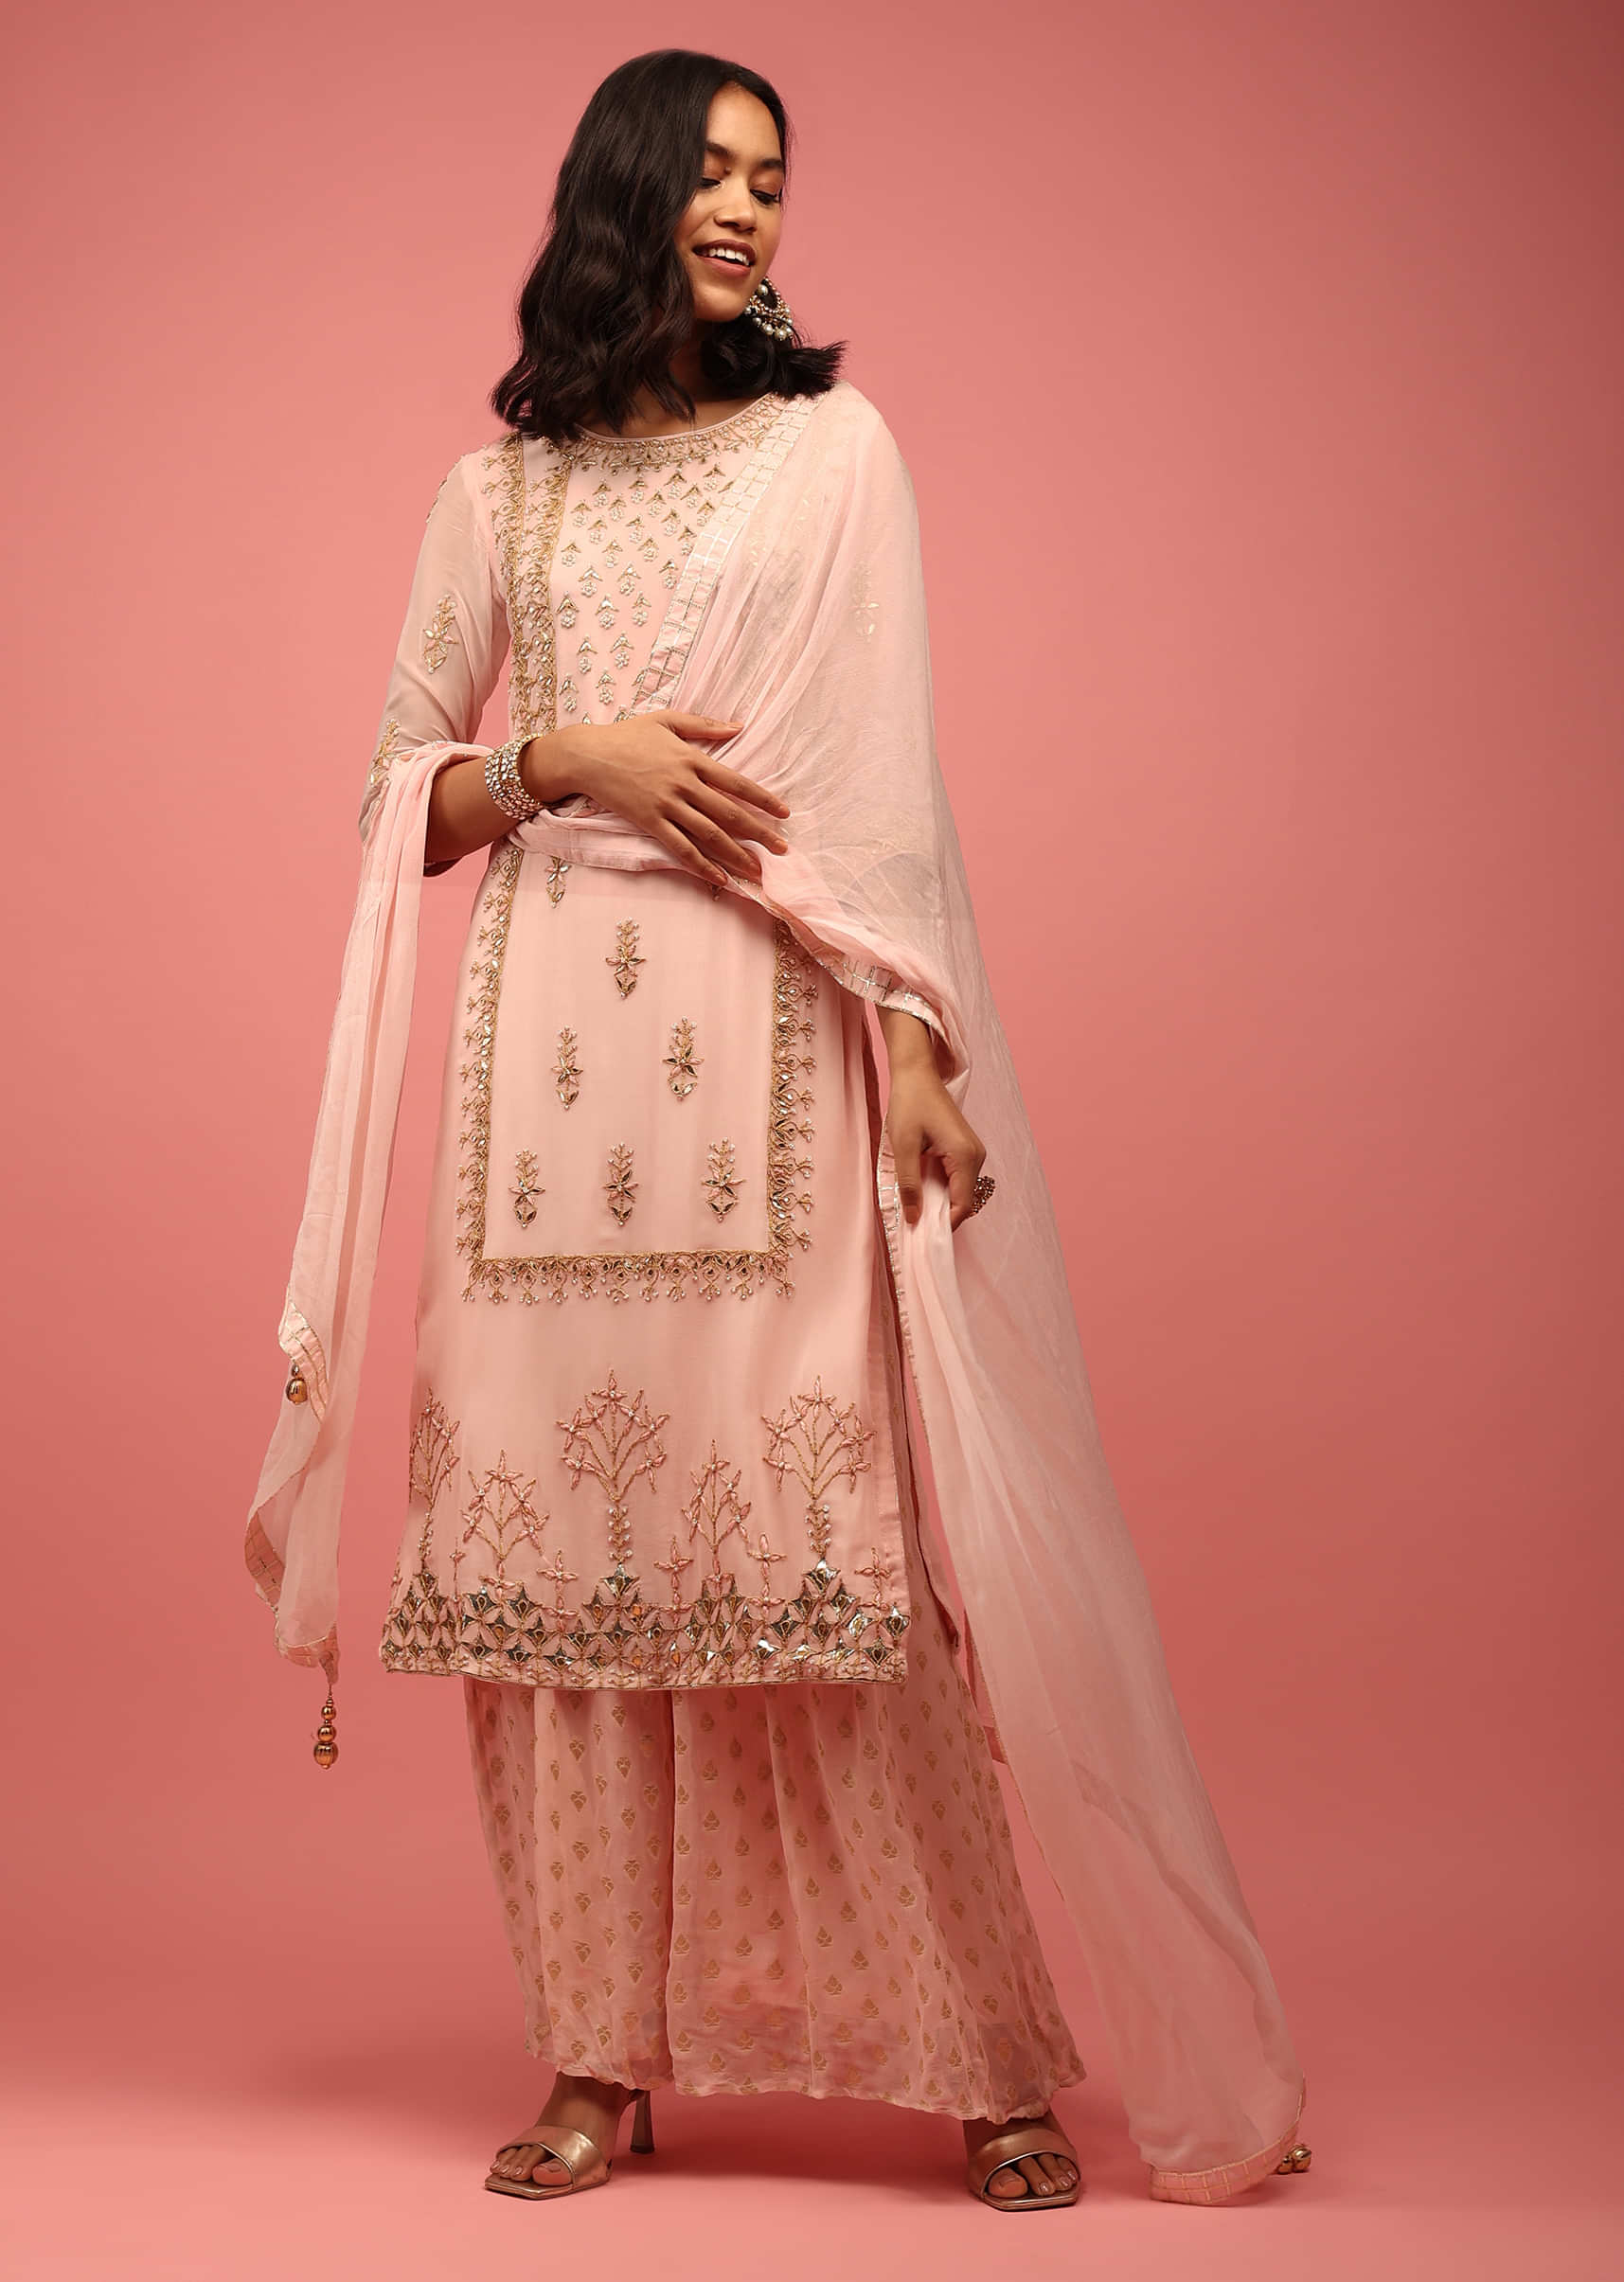 Pastel Peach Palazzo Suit Fully-Handcrafted In Banarasi Georgette With Zardosi, Pearls, And Gotta Work